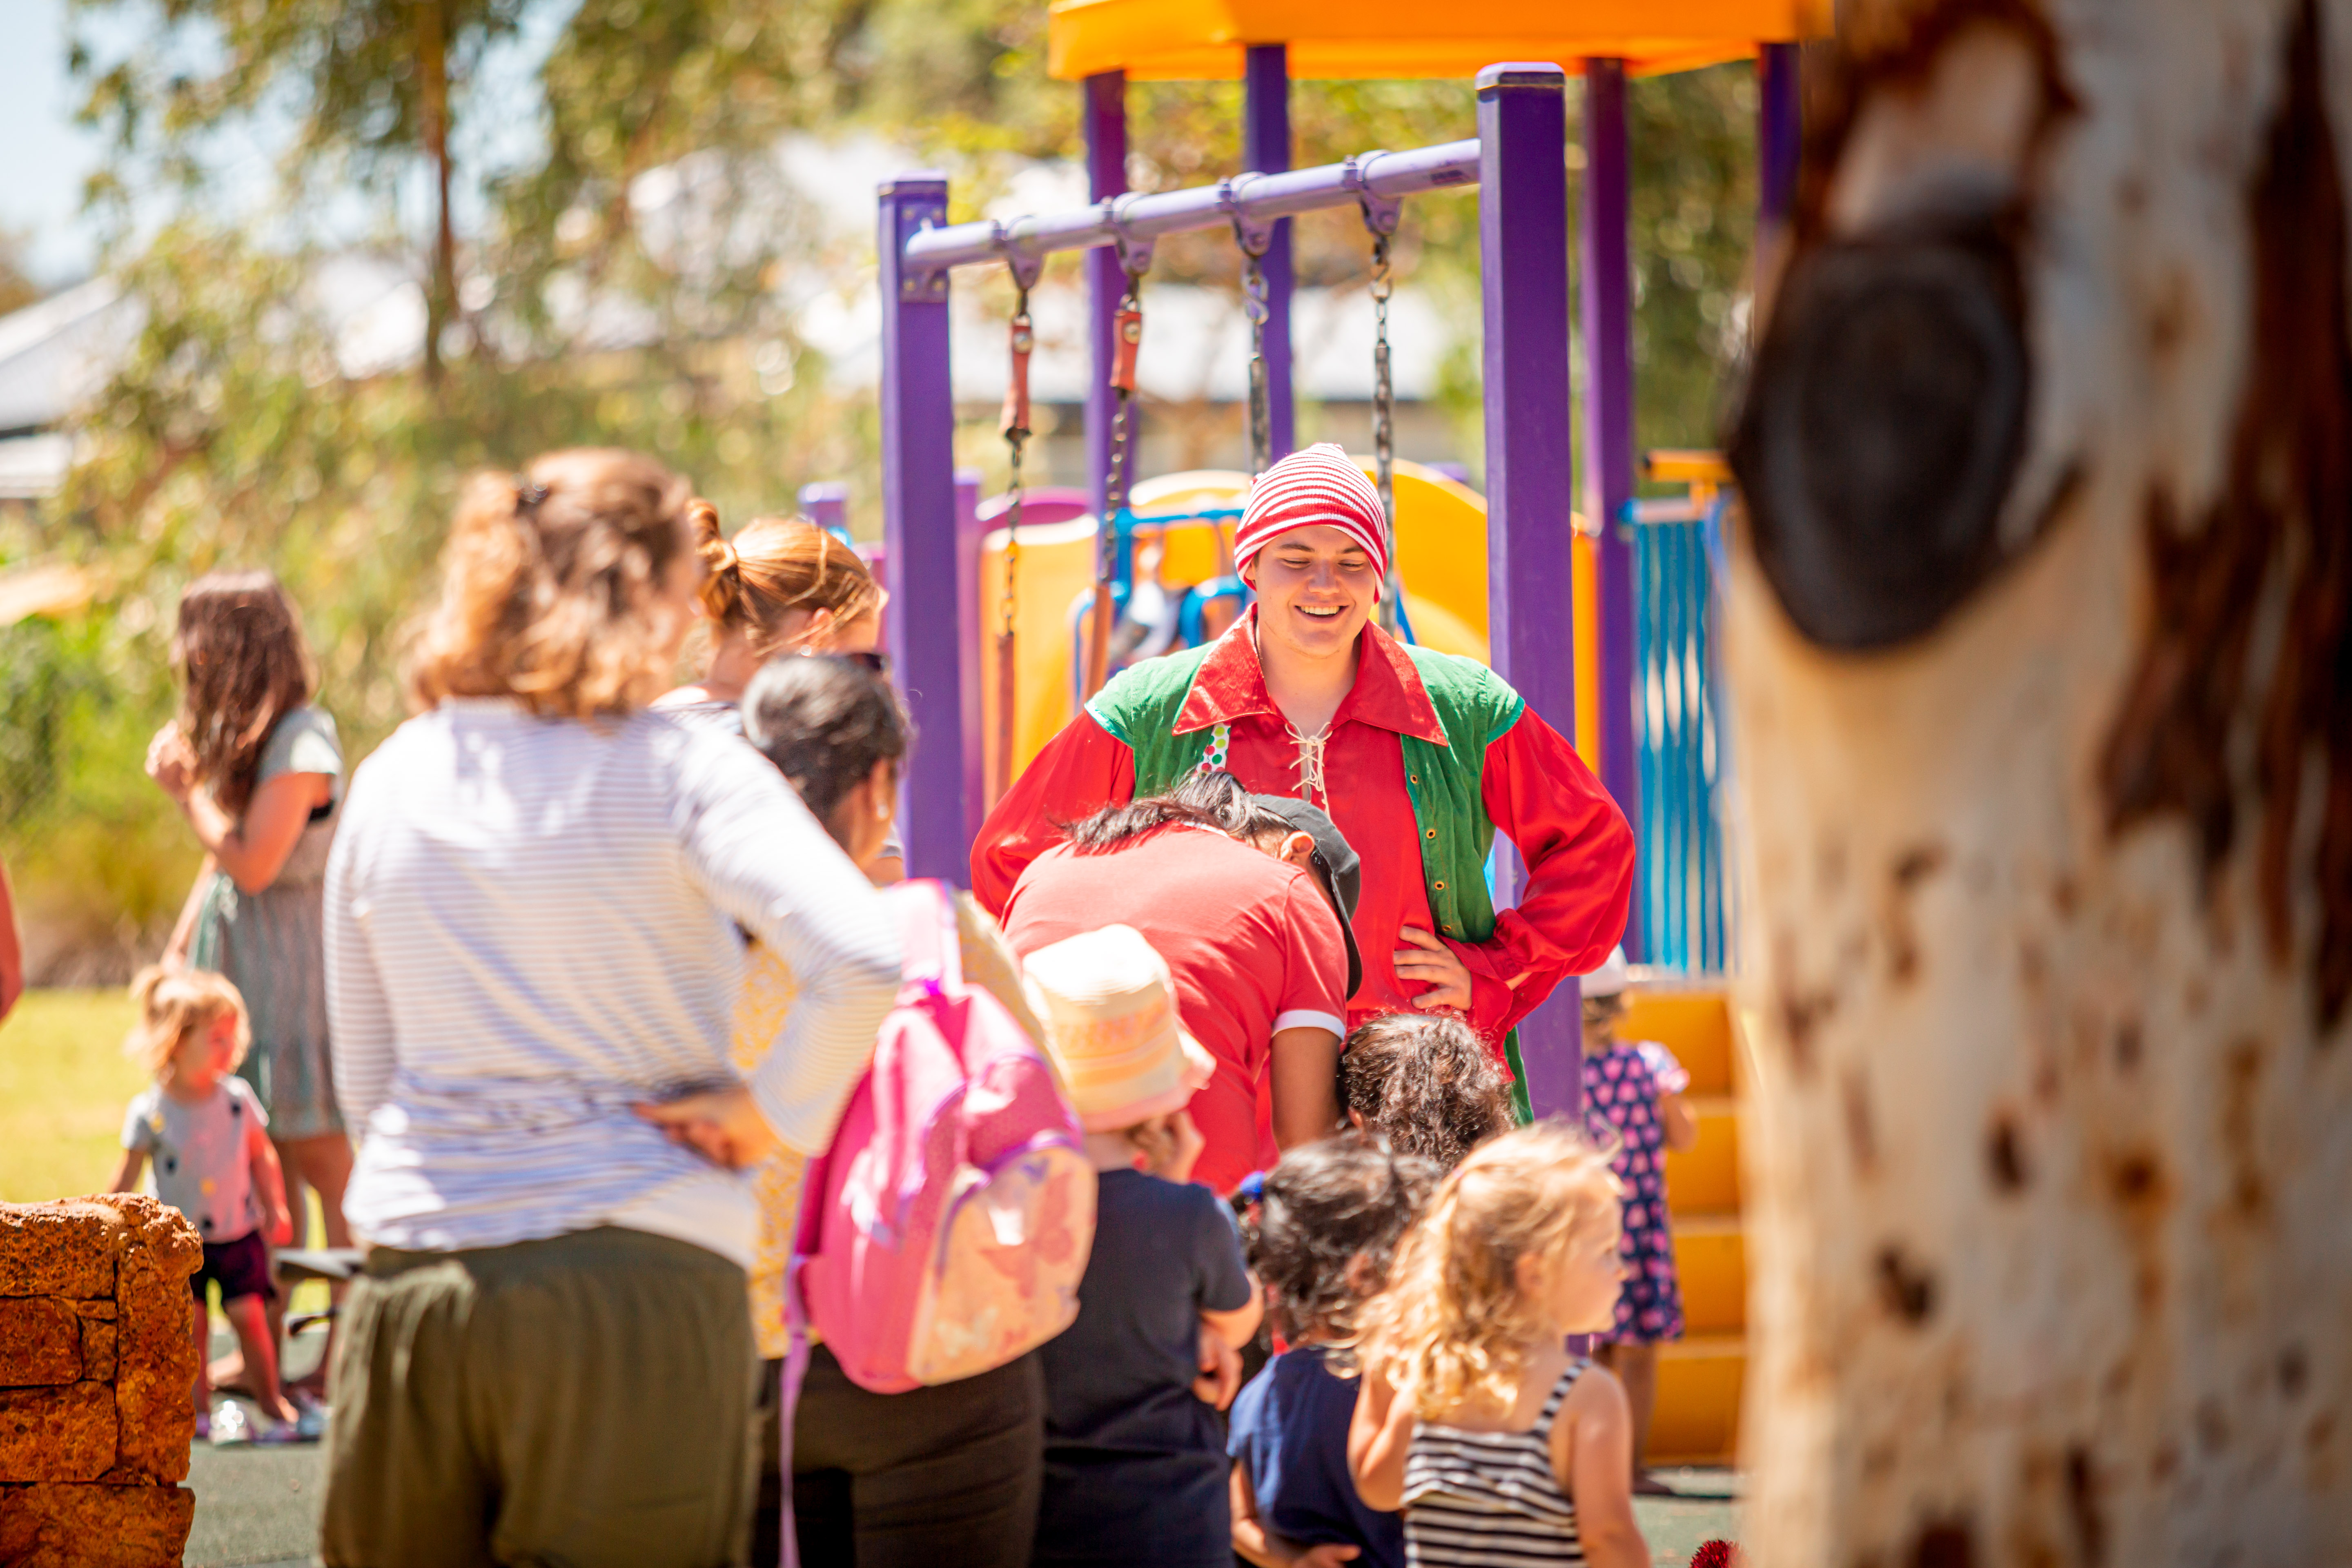 Children and families on play equipment with an Adult sized Christmas Elf